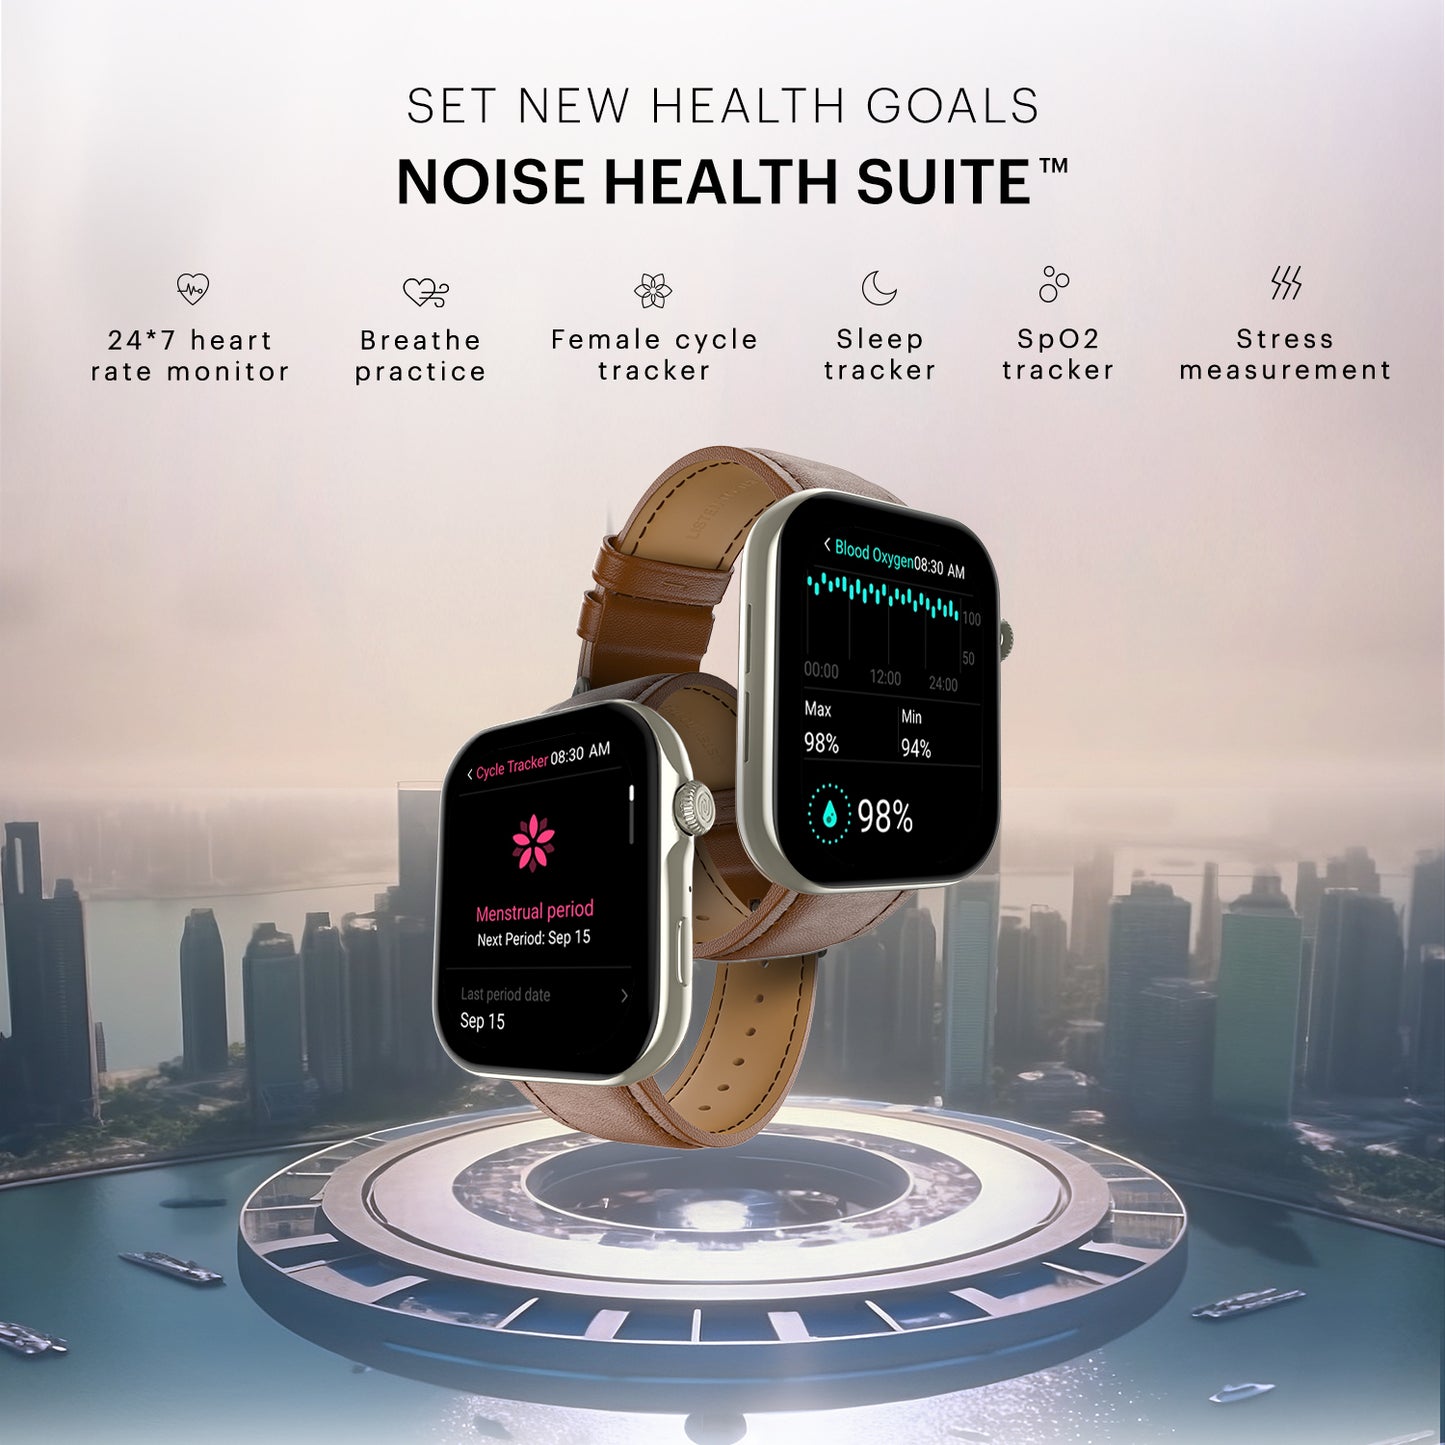 Noise Vision 3 Clasisic Smartwatch Price In Nepal